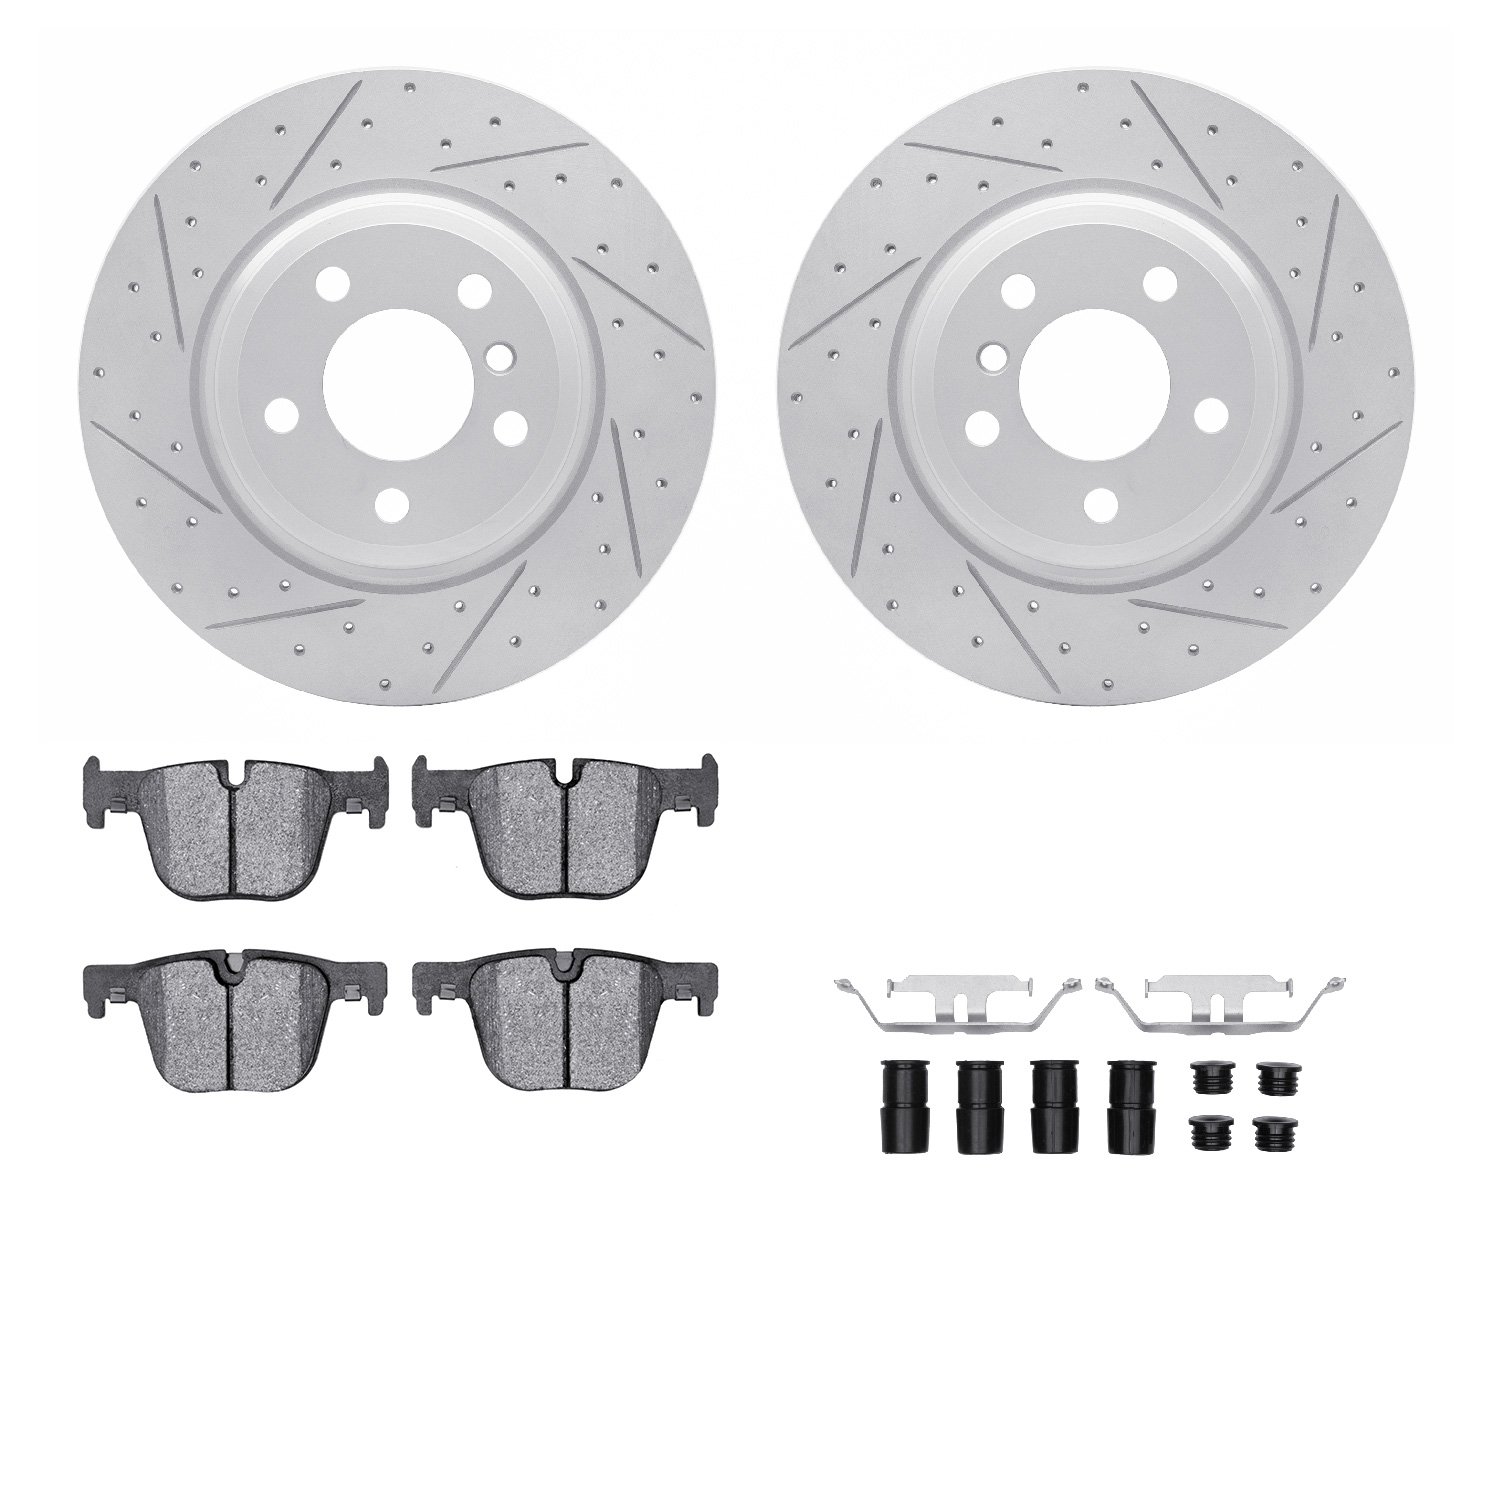 2512-31082 Geoperformance Drilled/Slotted Rotors w/5000 Advanced Brake Pads Kit & Hardware, 2014-2015 BMW, Position: Rear